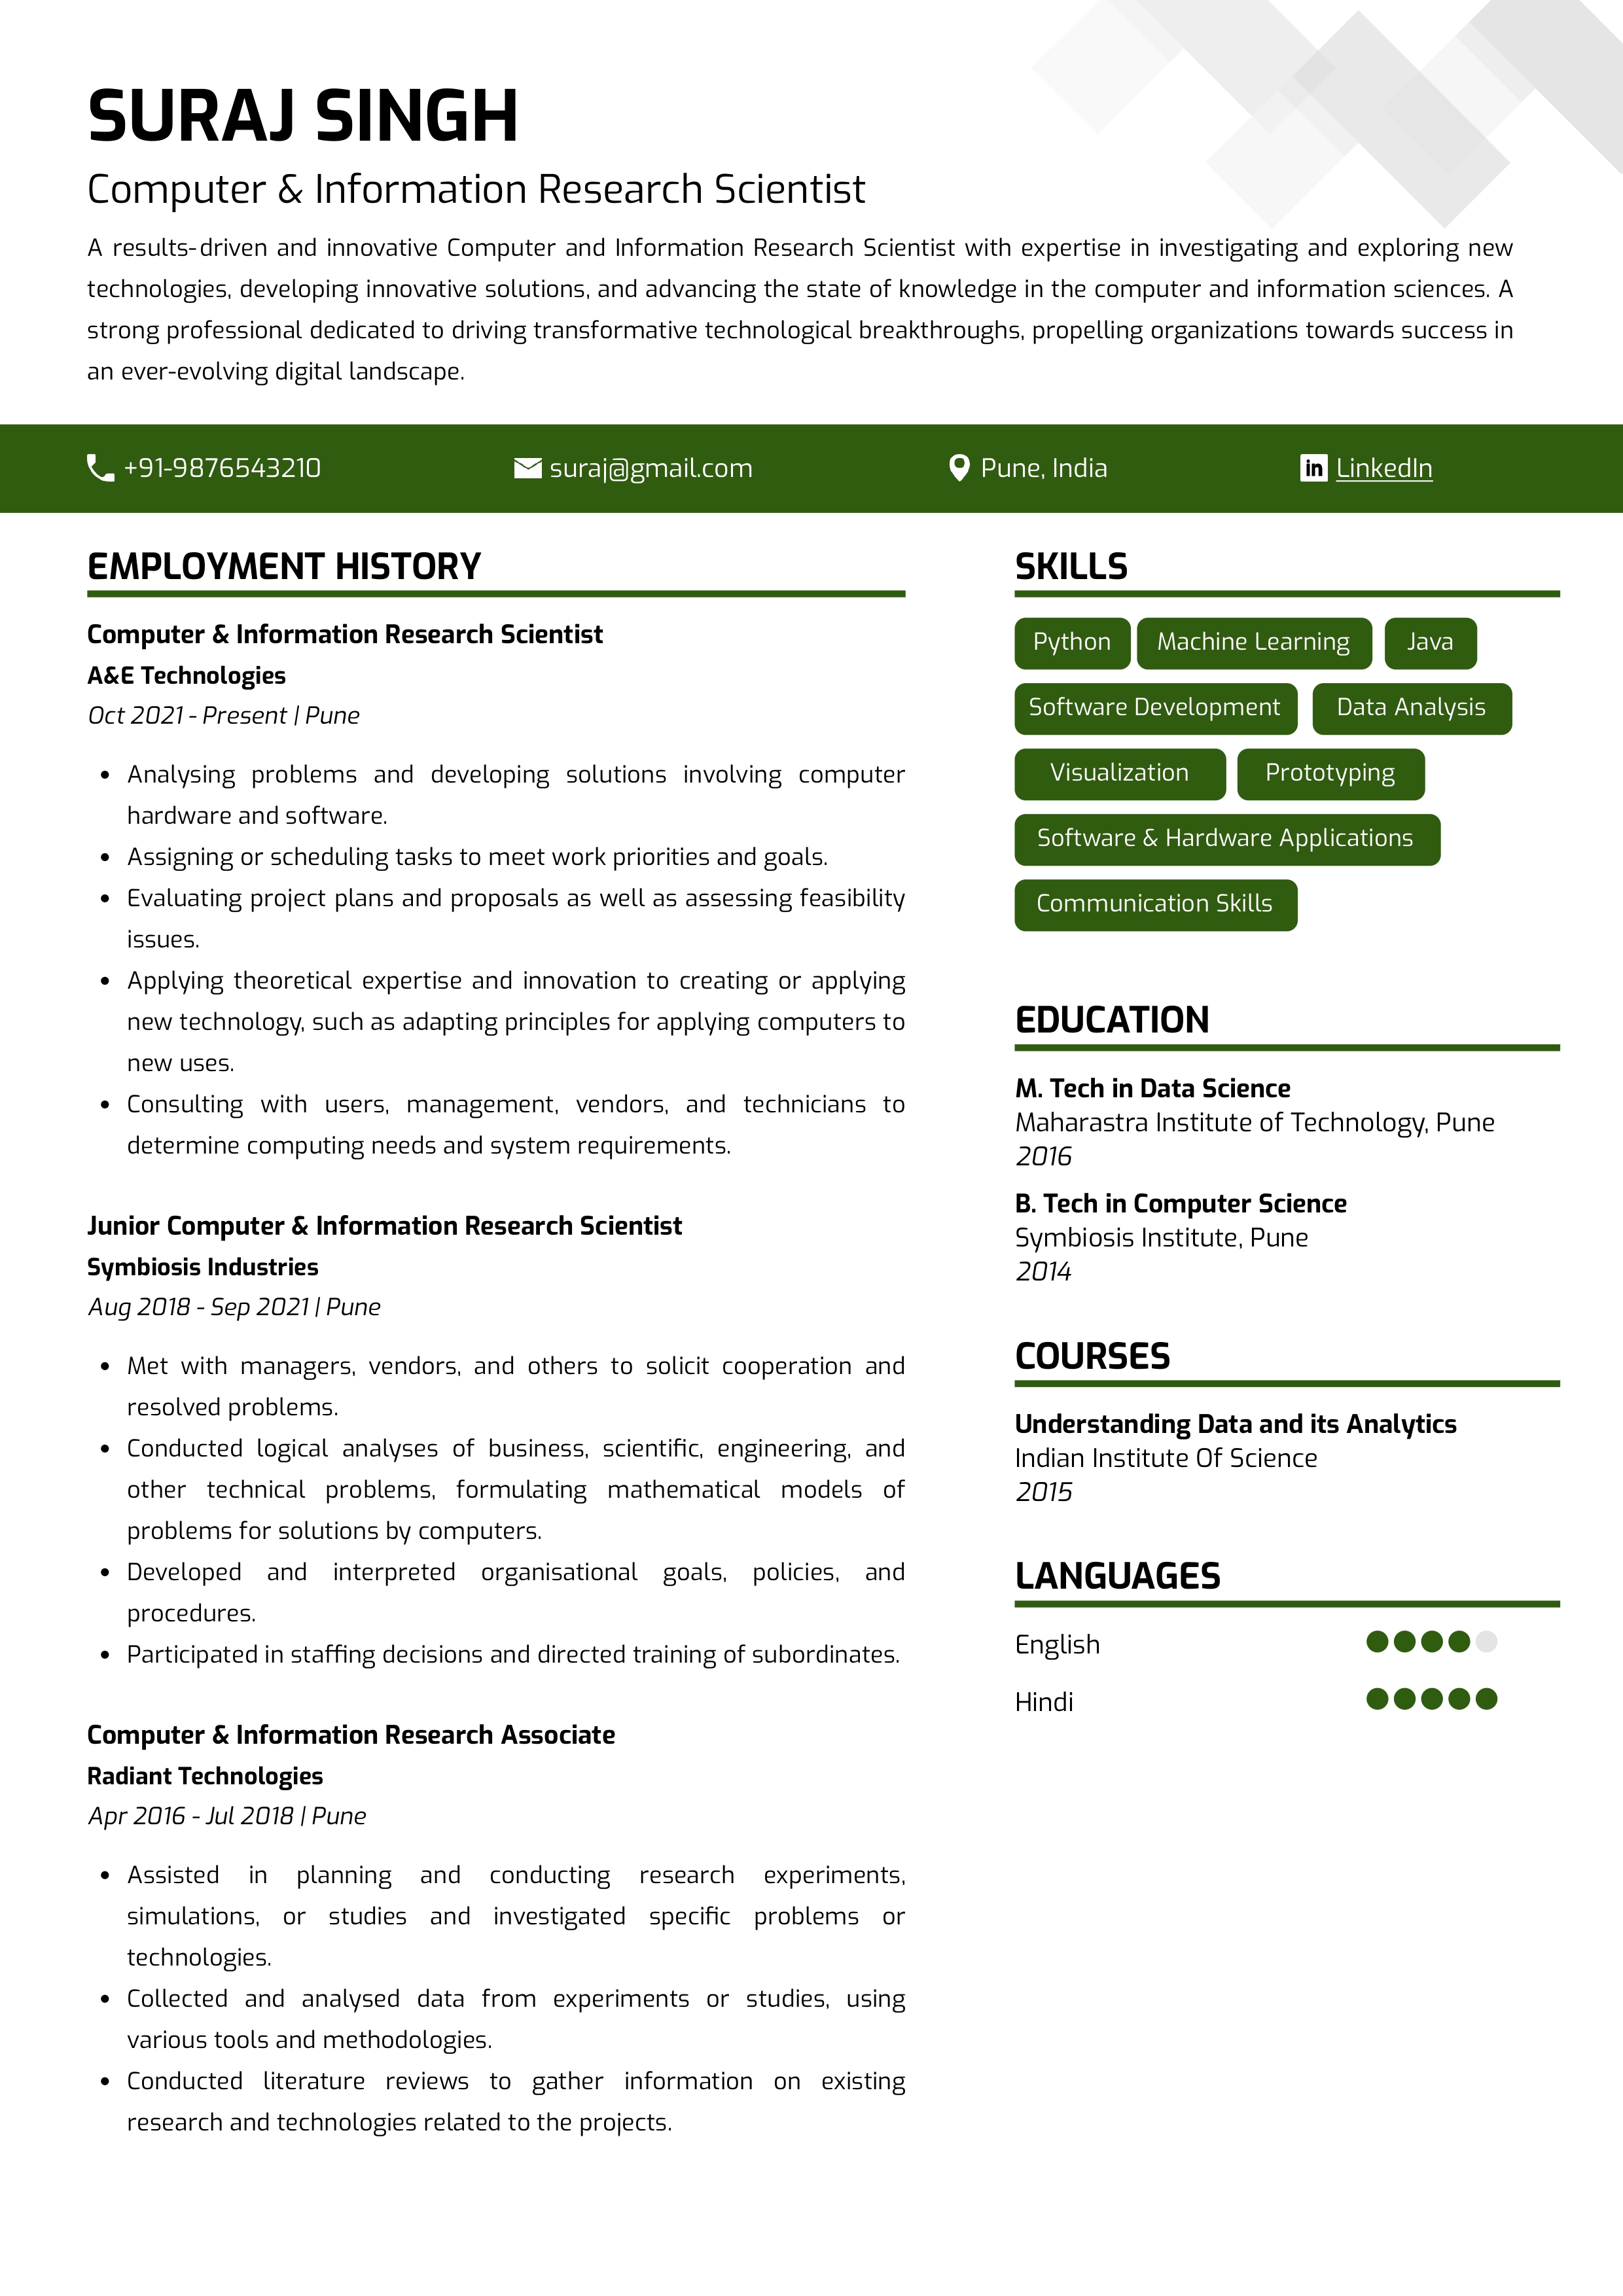 Sample Resume of Computer and Information Research Scientist | Free Resume Templates & Samples on Resumod.co